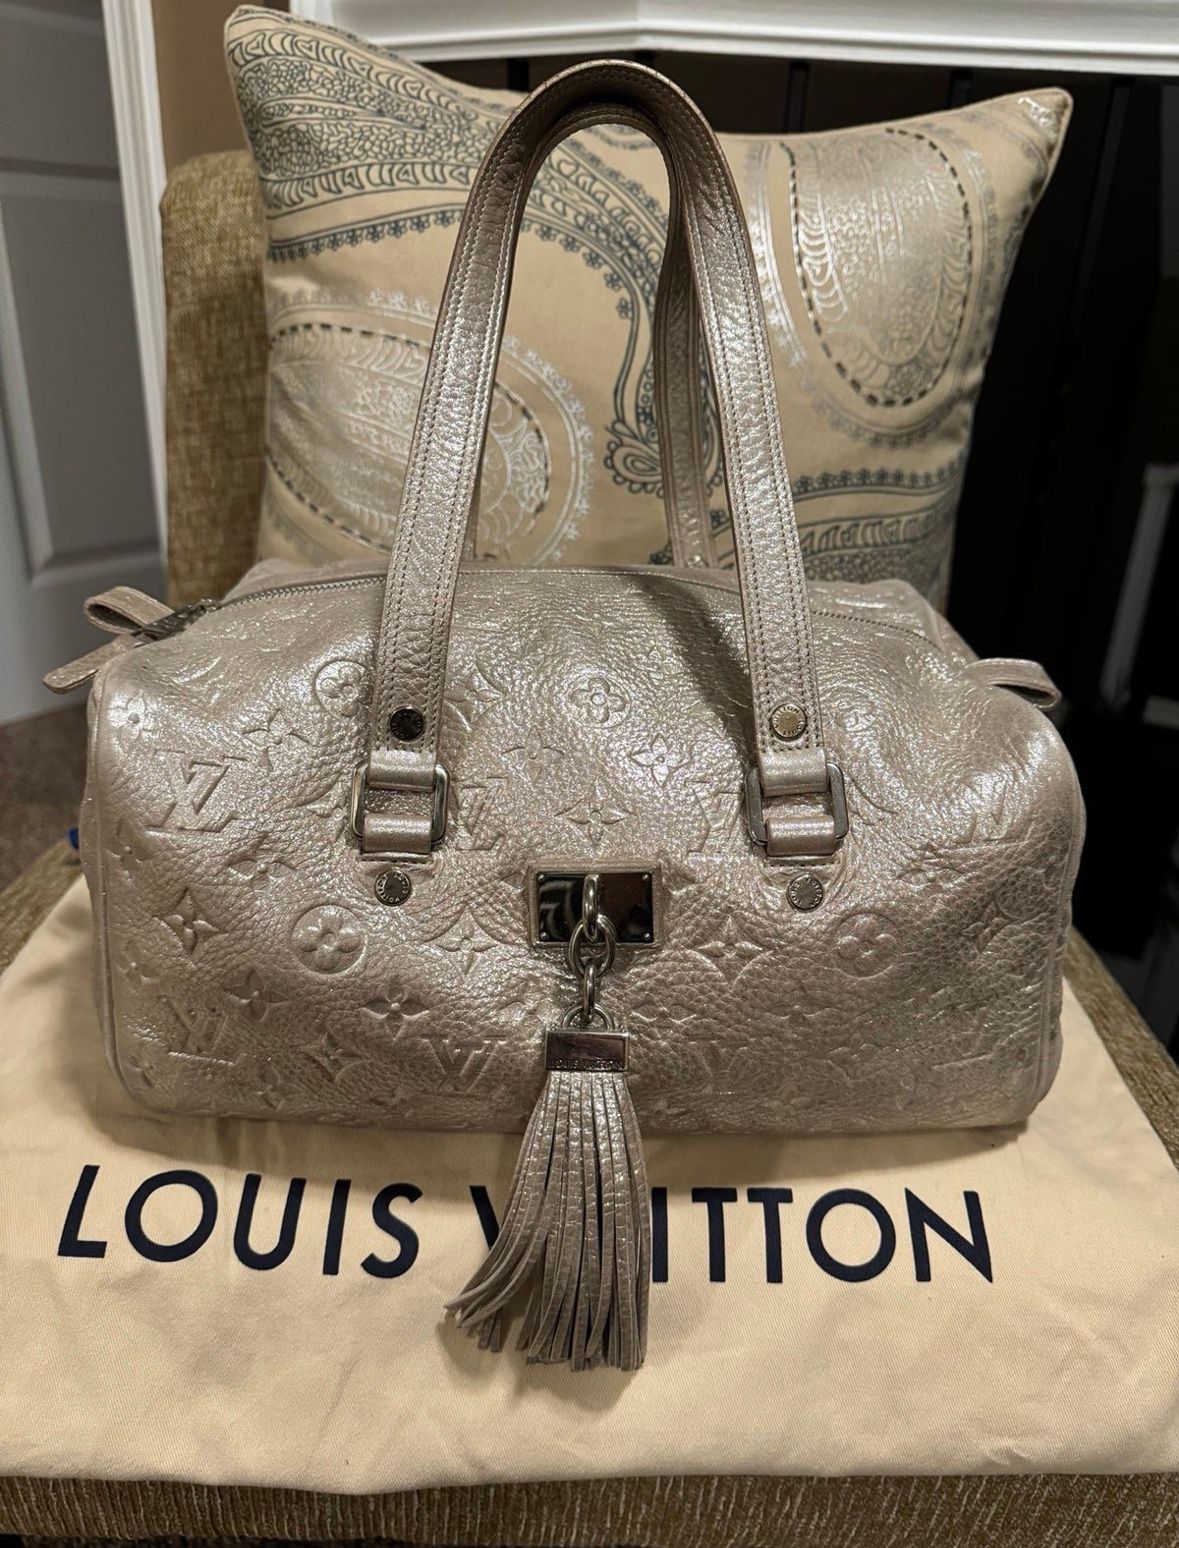 ❤️ MOTHER’S DAY SPECIAL! LV LOUIS VUITTON SHIMMER COMETE BRITTNEY SPEARS PURSE W/ DUST BAG ❤️